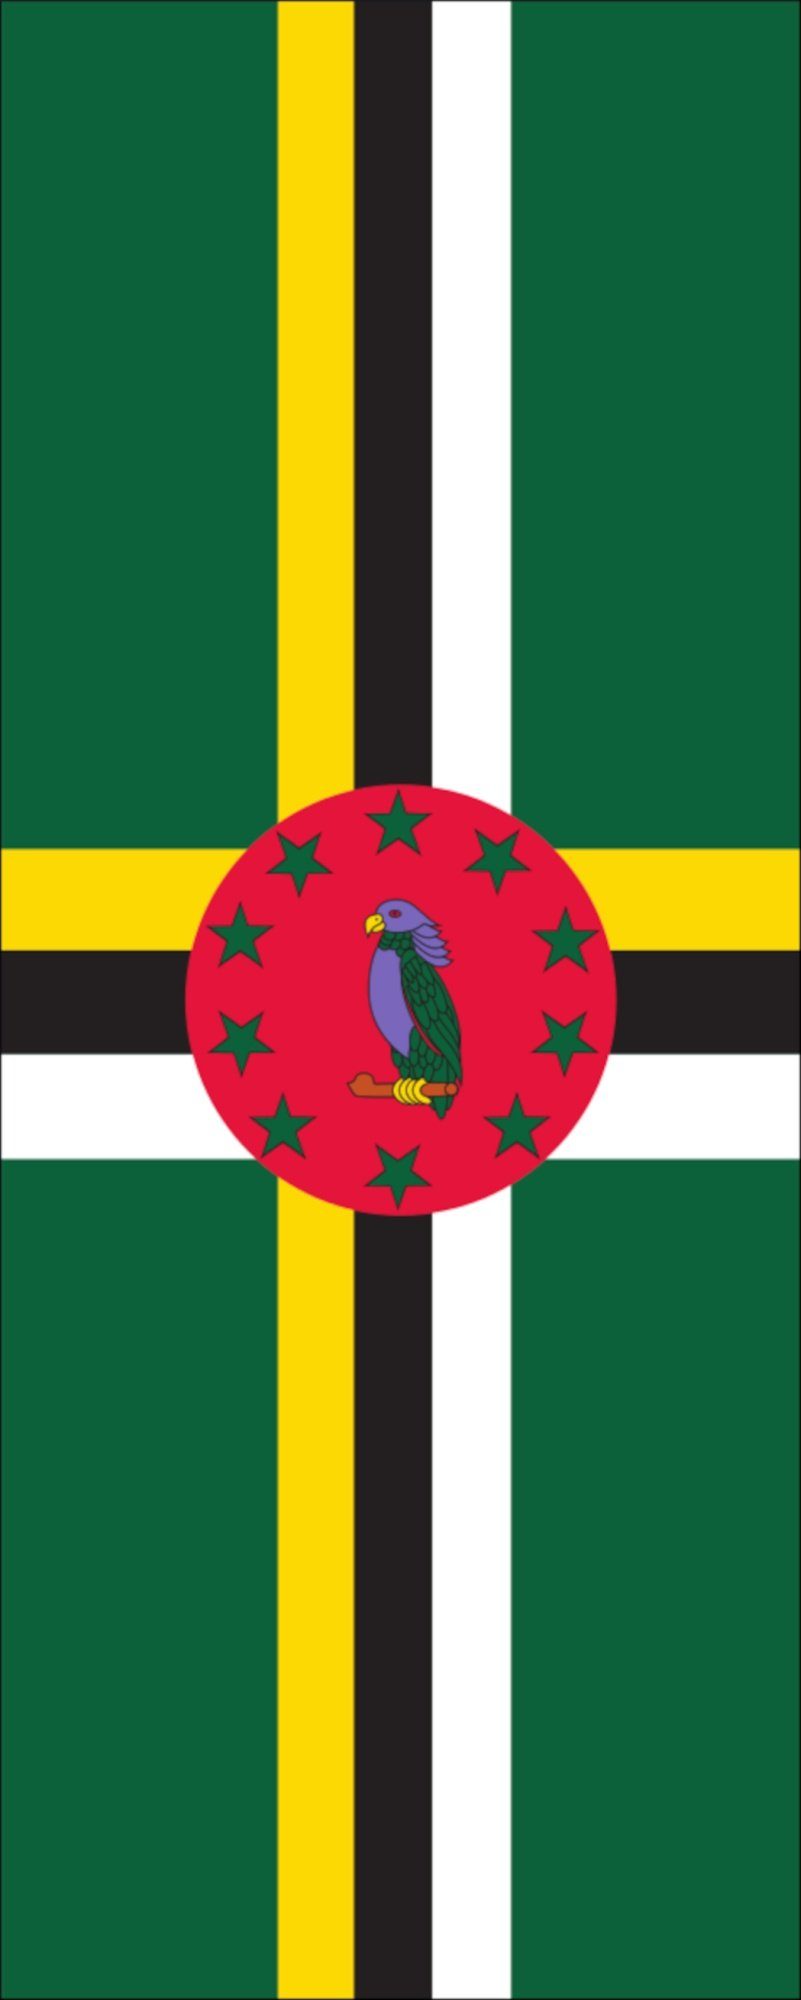 flaggenmeer Flagge Flagge Dominica g/m² Hochformat 110